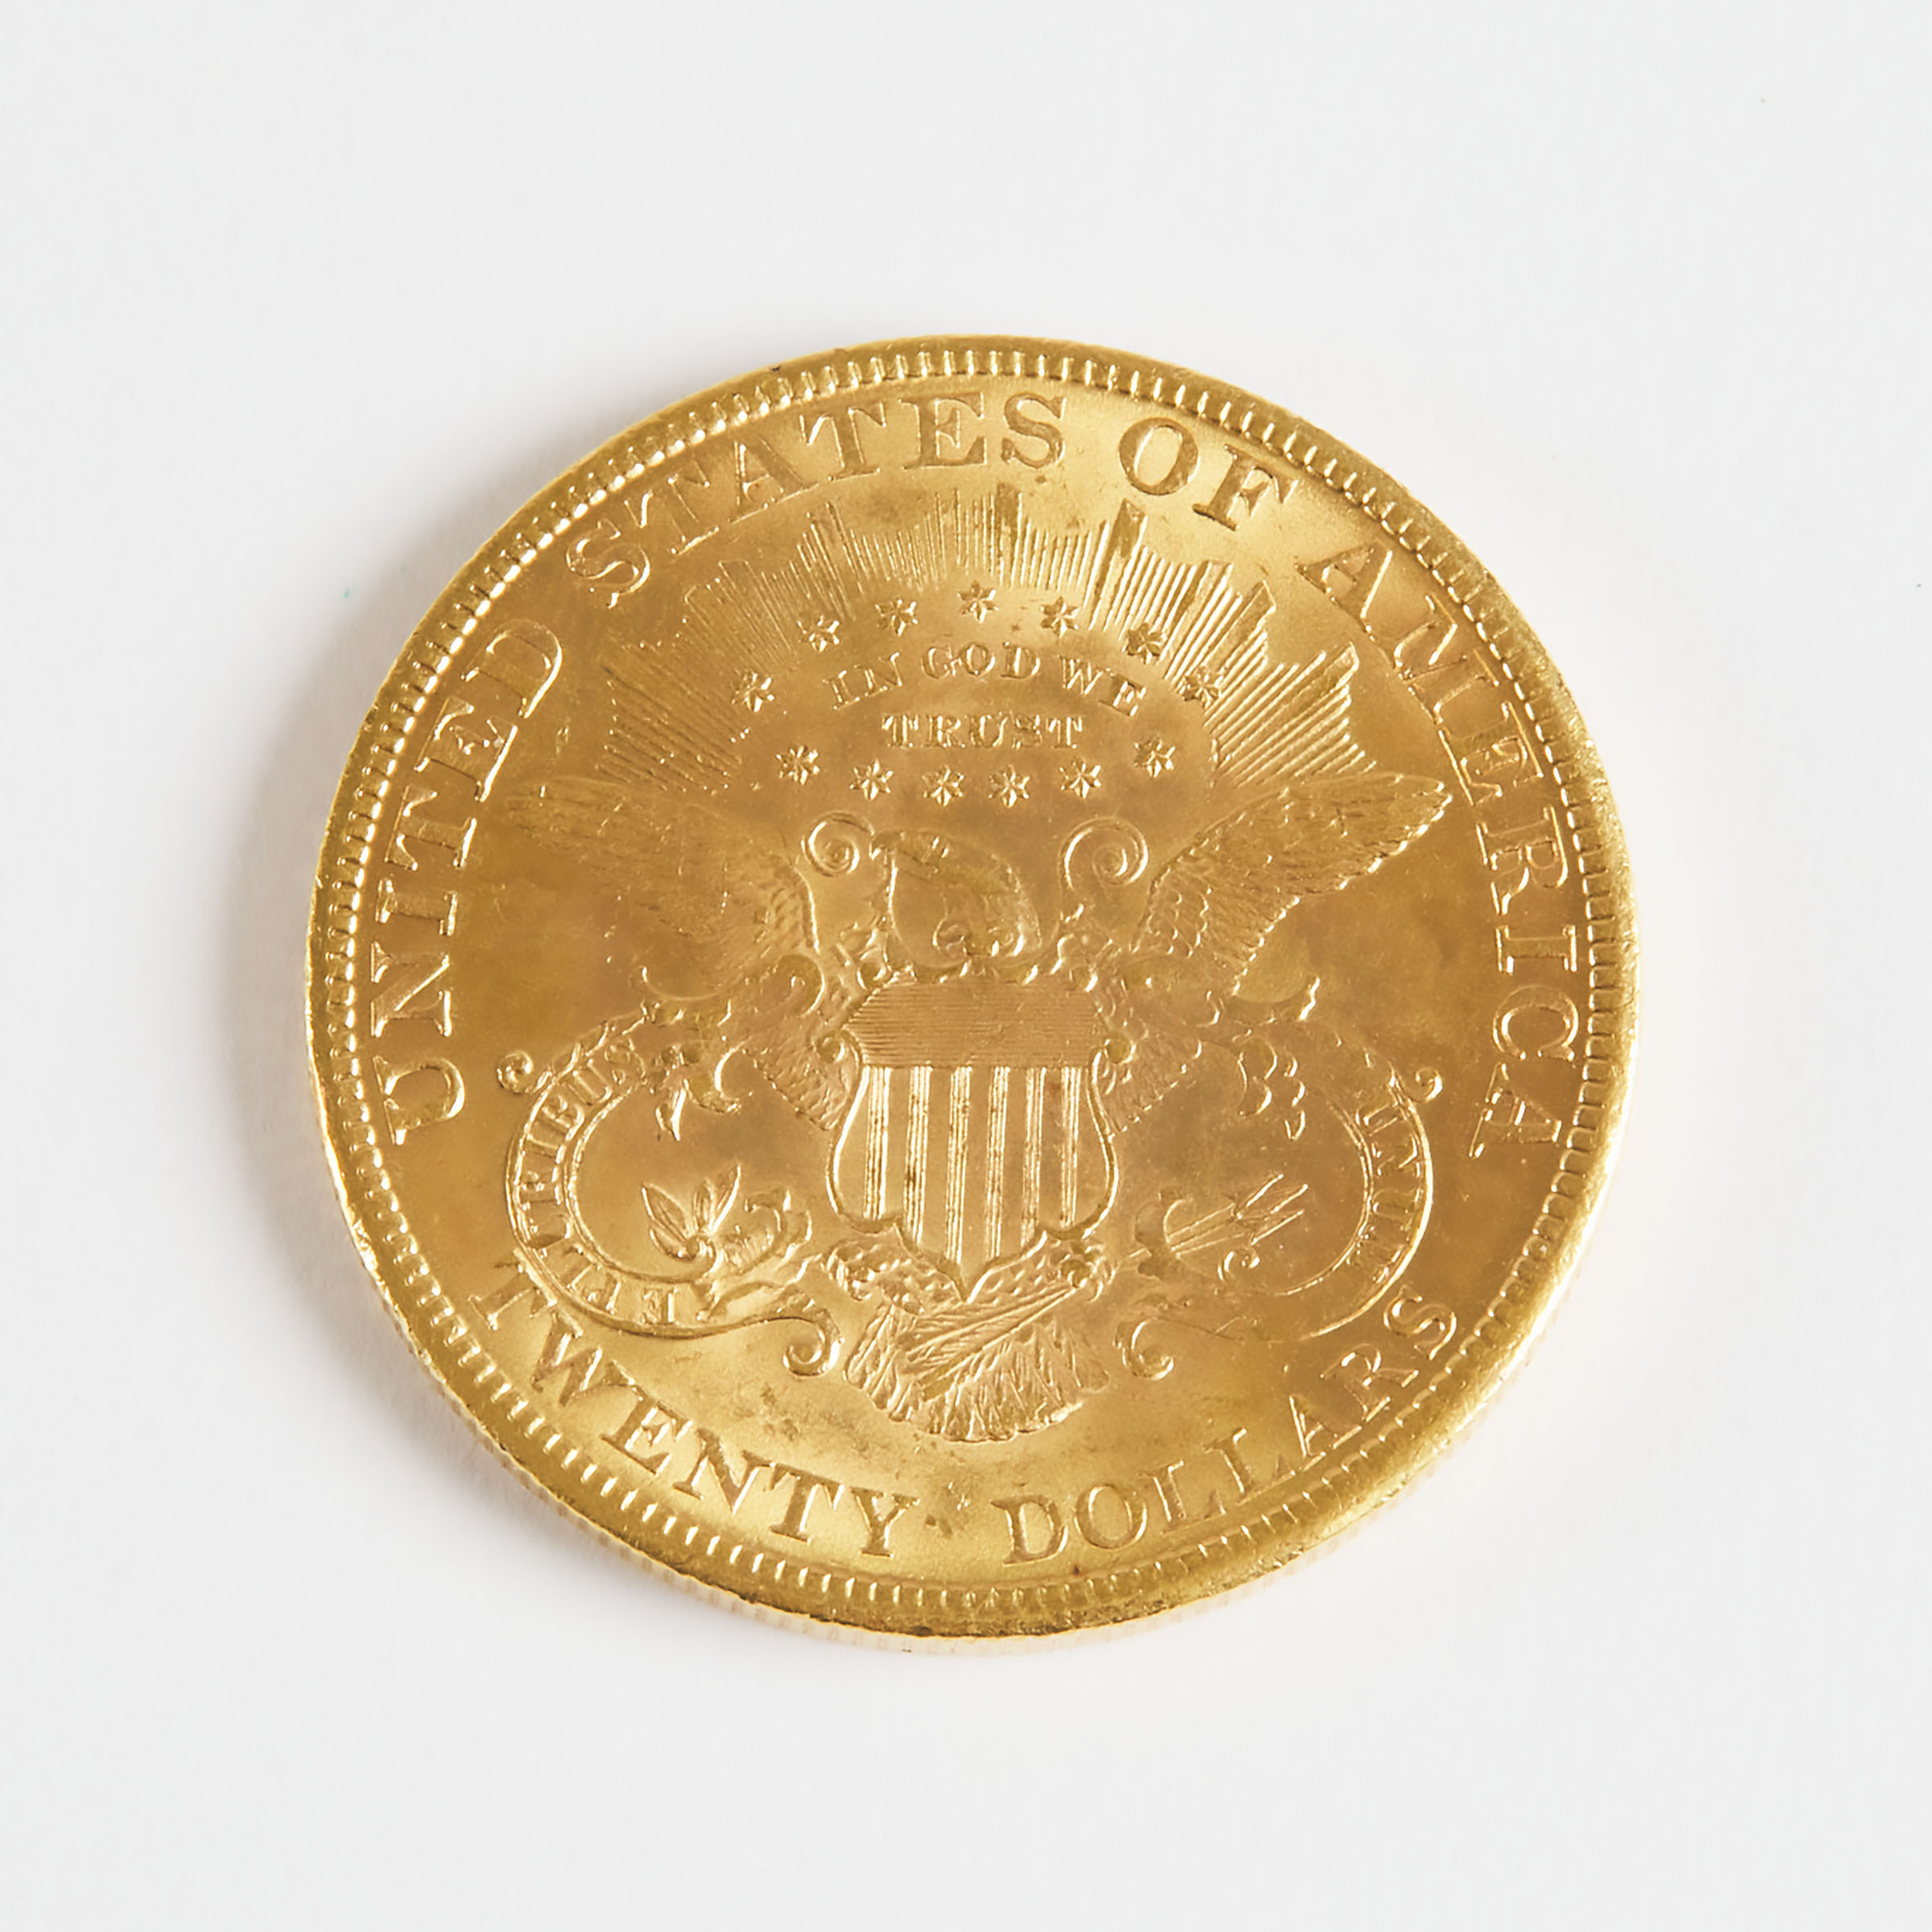 American 1900 $20 Double Eagle Gold Coin